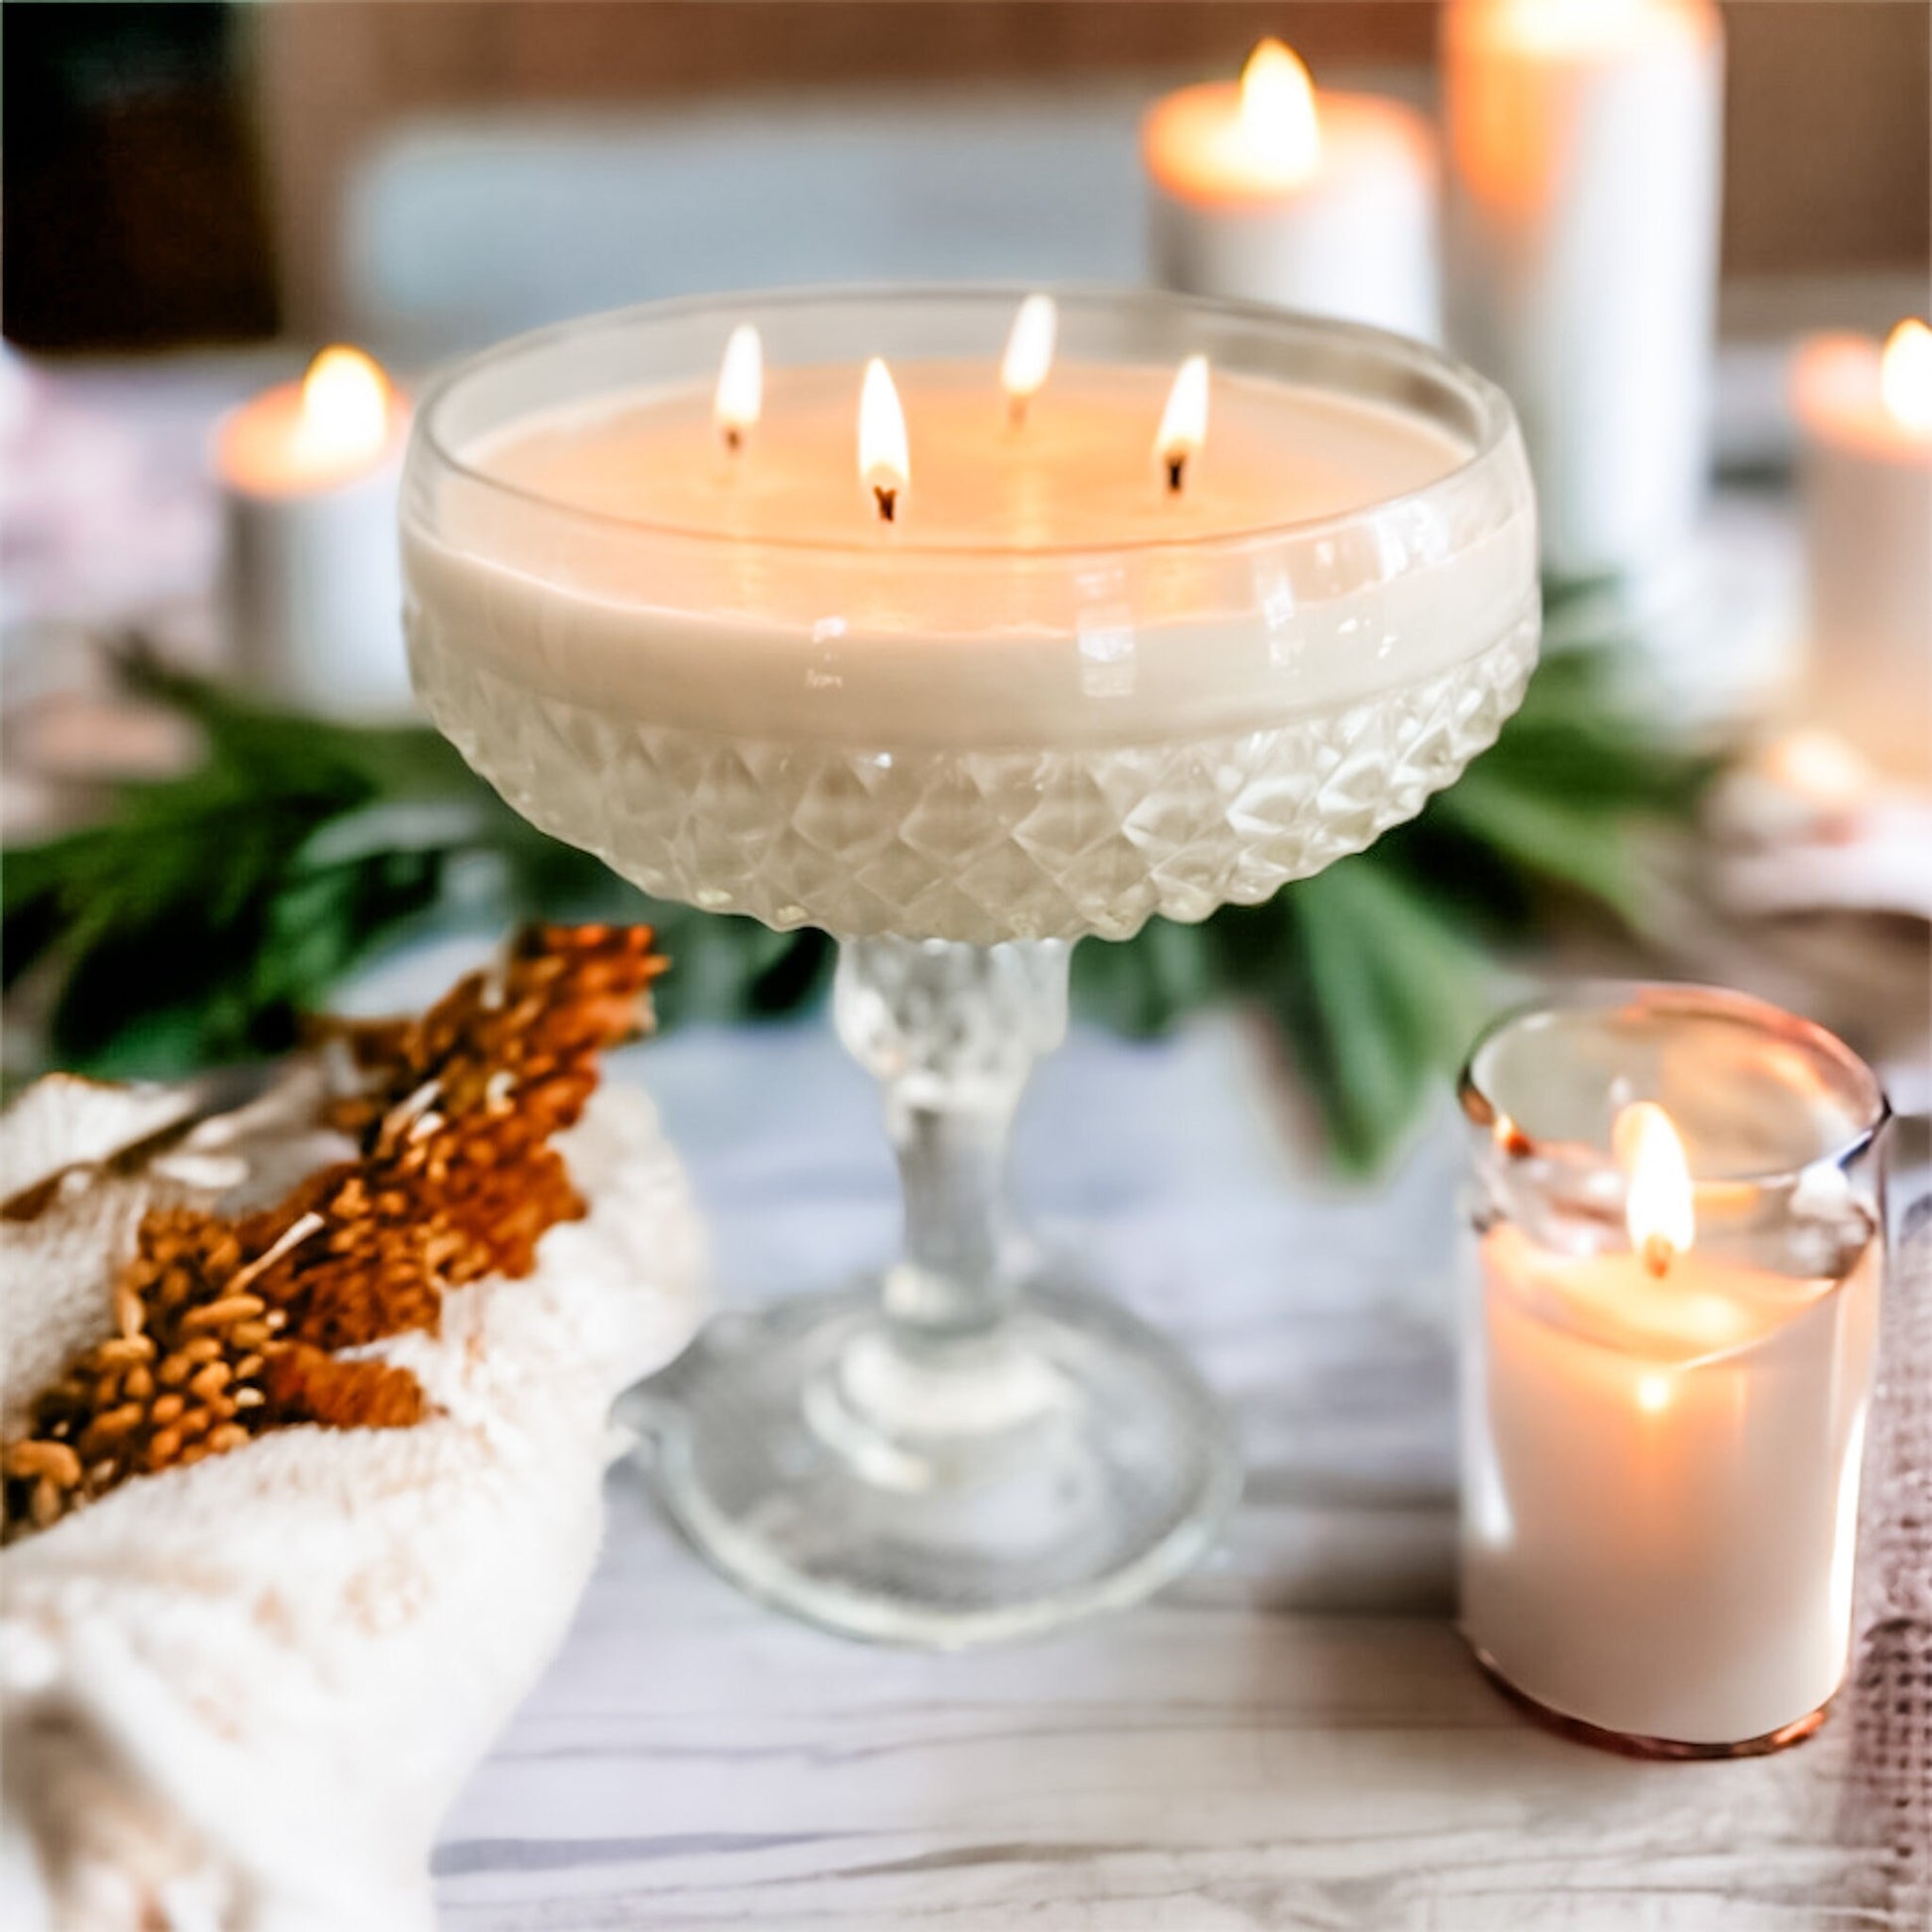 What is the Best Wax for Candles?